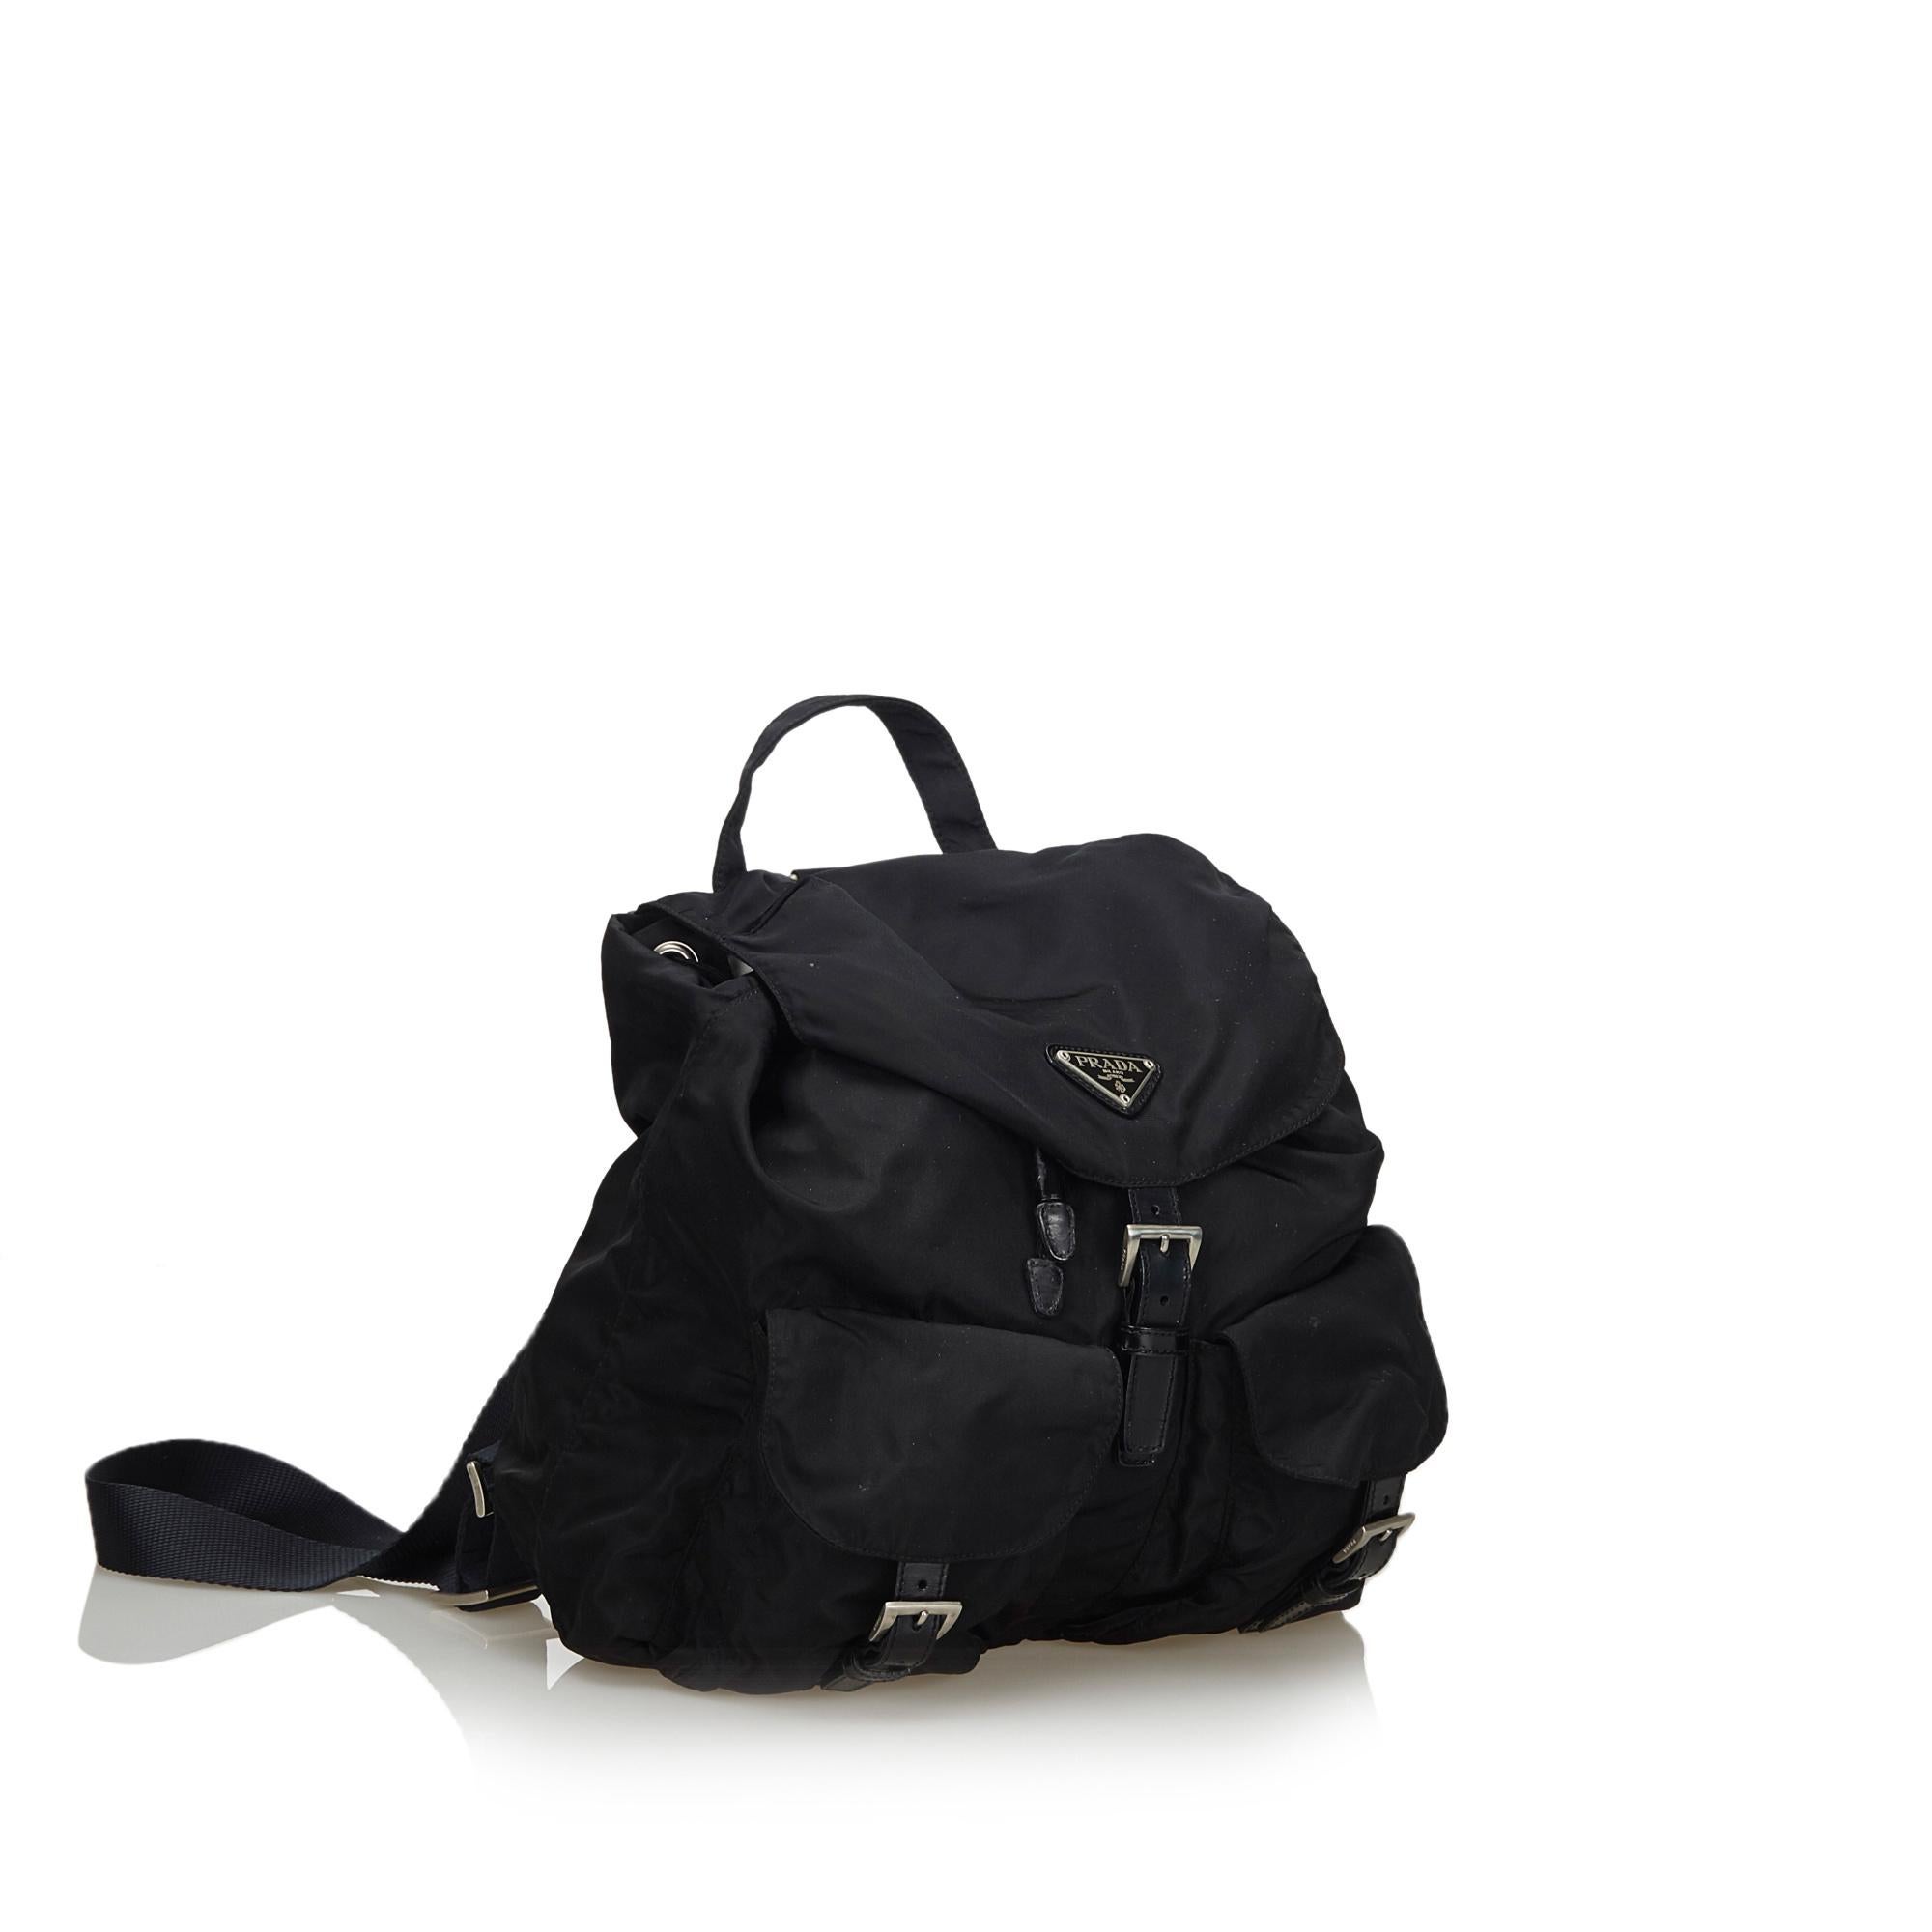 This backpack features a nylon body with leather trim, front exterior flap pockets with leather buckle closure, flat back straps, a flat top handle, a top flap with a drawstring closure, and an interior zip pocket. It carries as B+ condition